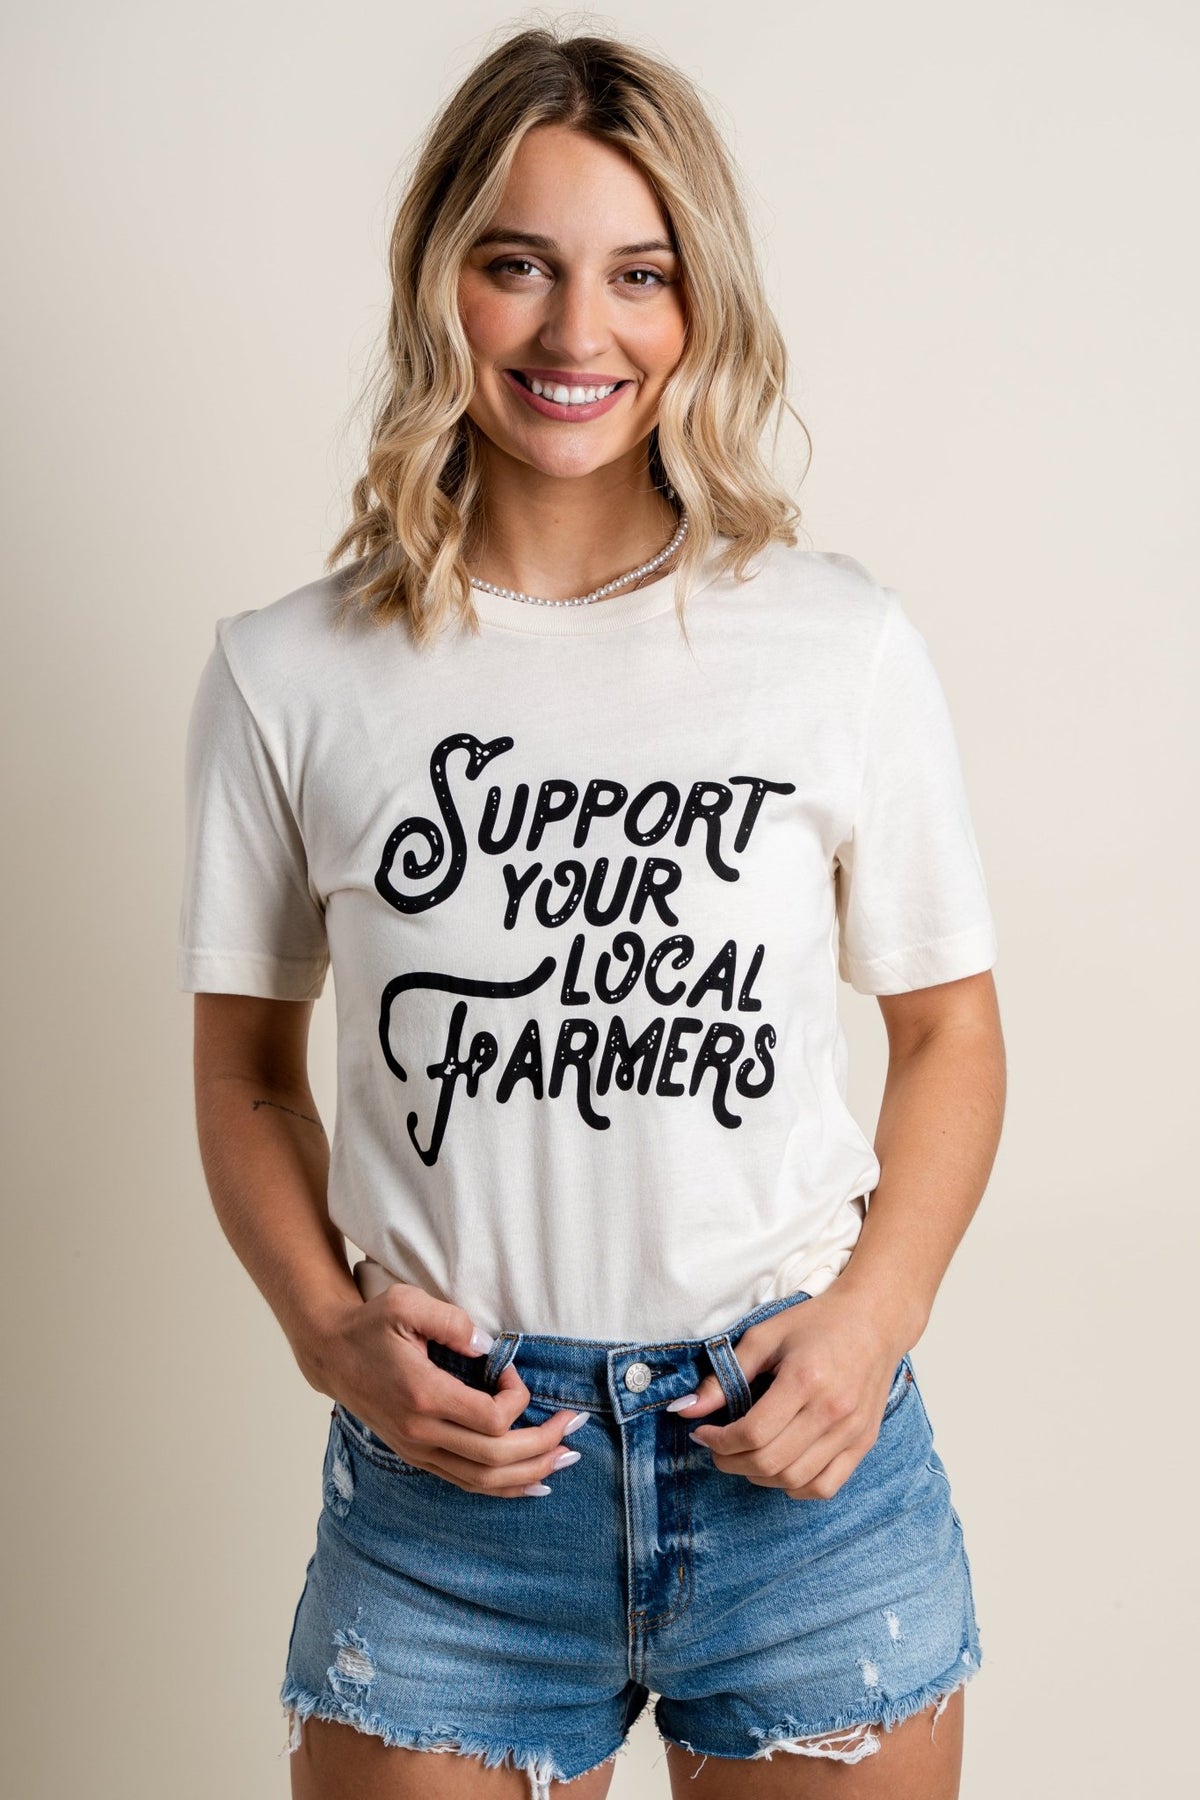 Support local farmers t-shirt ivory/natural - Cute T-shirts - Trendy Graphic T-Shirts at Lush Fashion Lounge Boutique in Oklahoma City